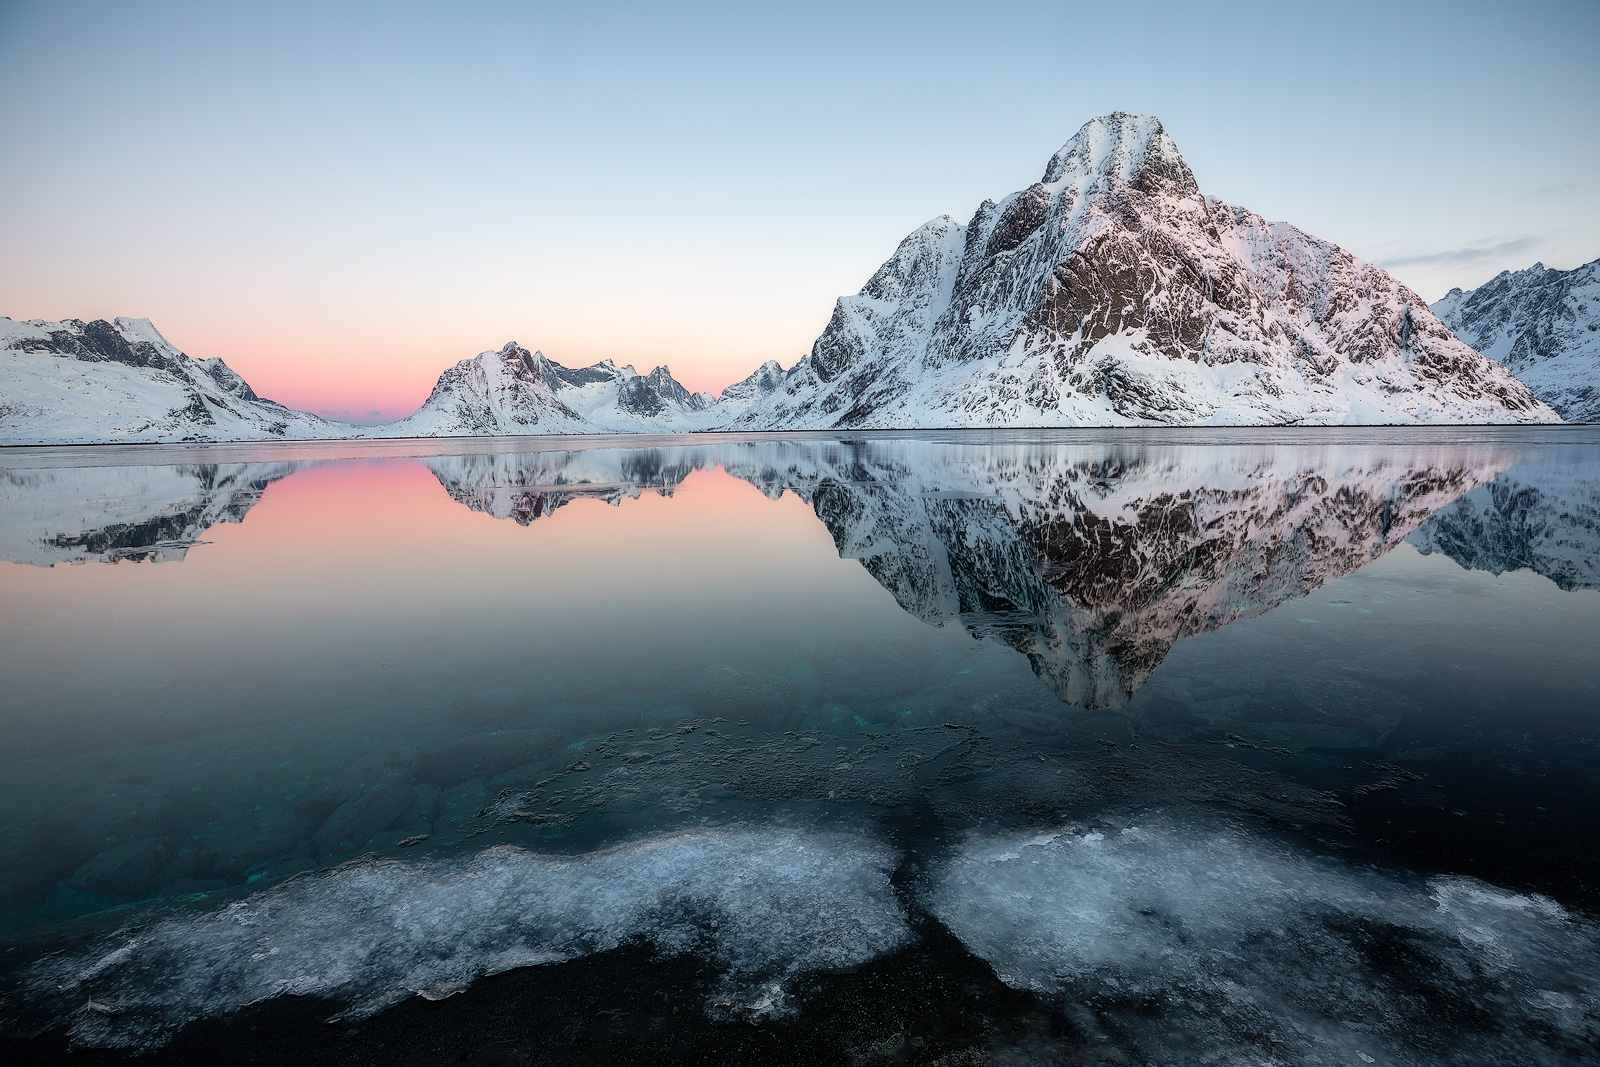 A calm blue morning in Lofoten with reflections of the mountains in icy waters.